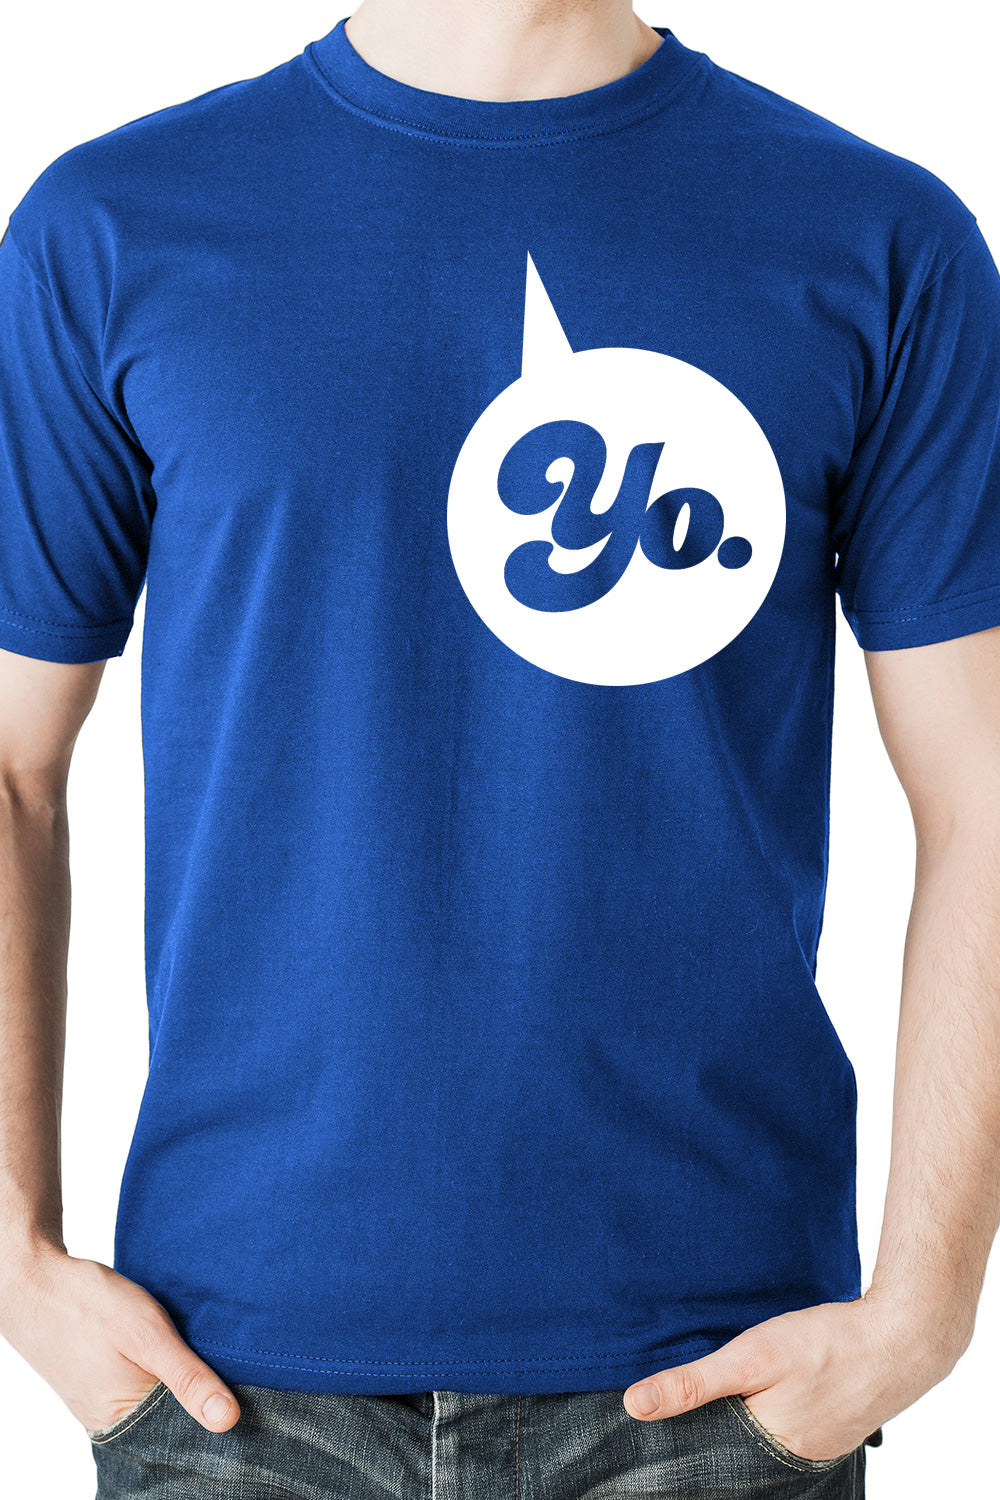 Yo! Message Bubble Printed towards one side of the chest - Blue Printed Casual T-Shirt